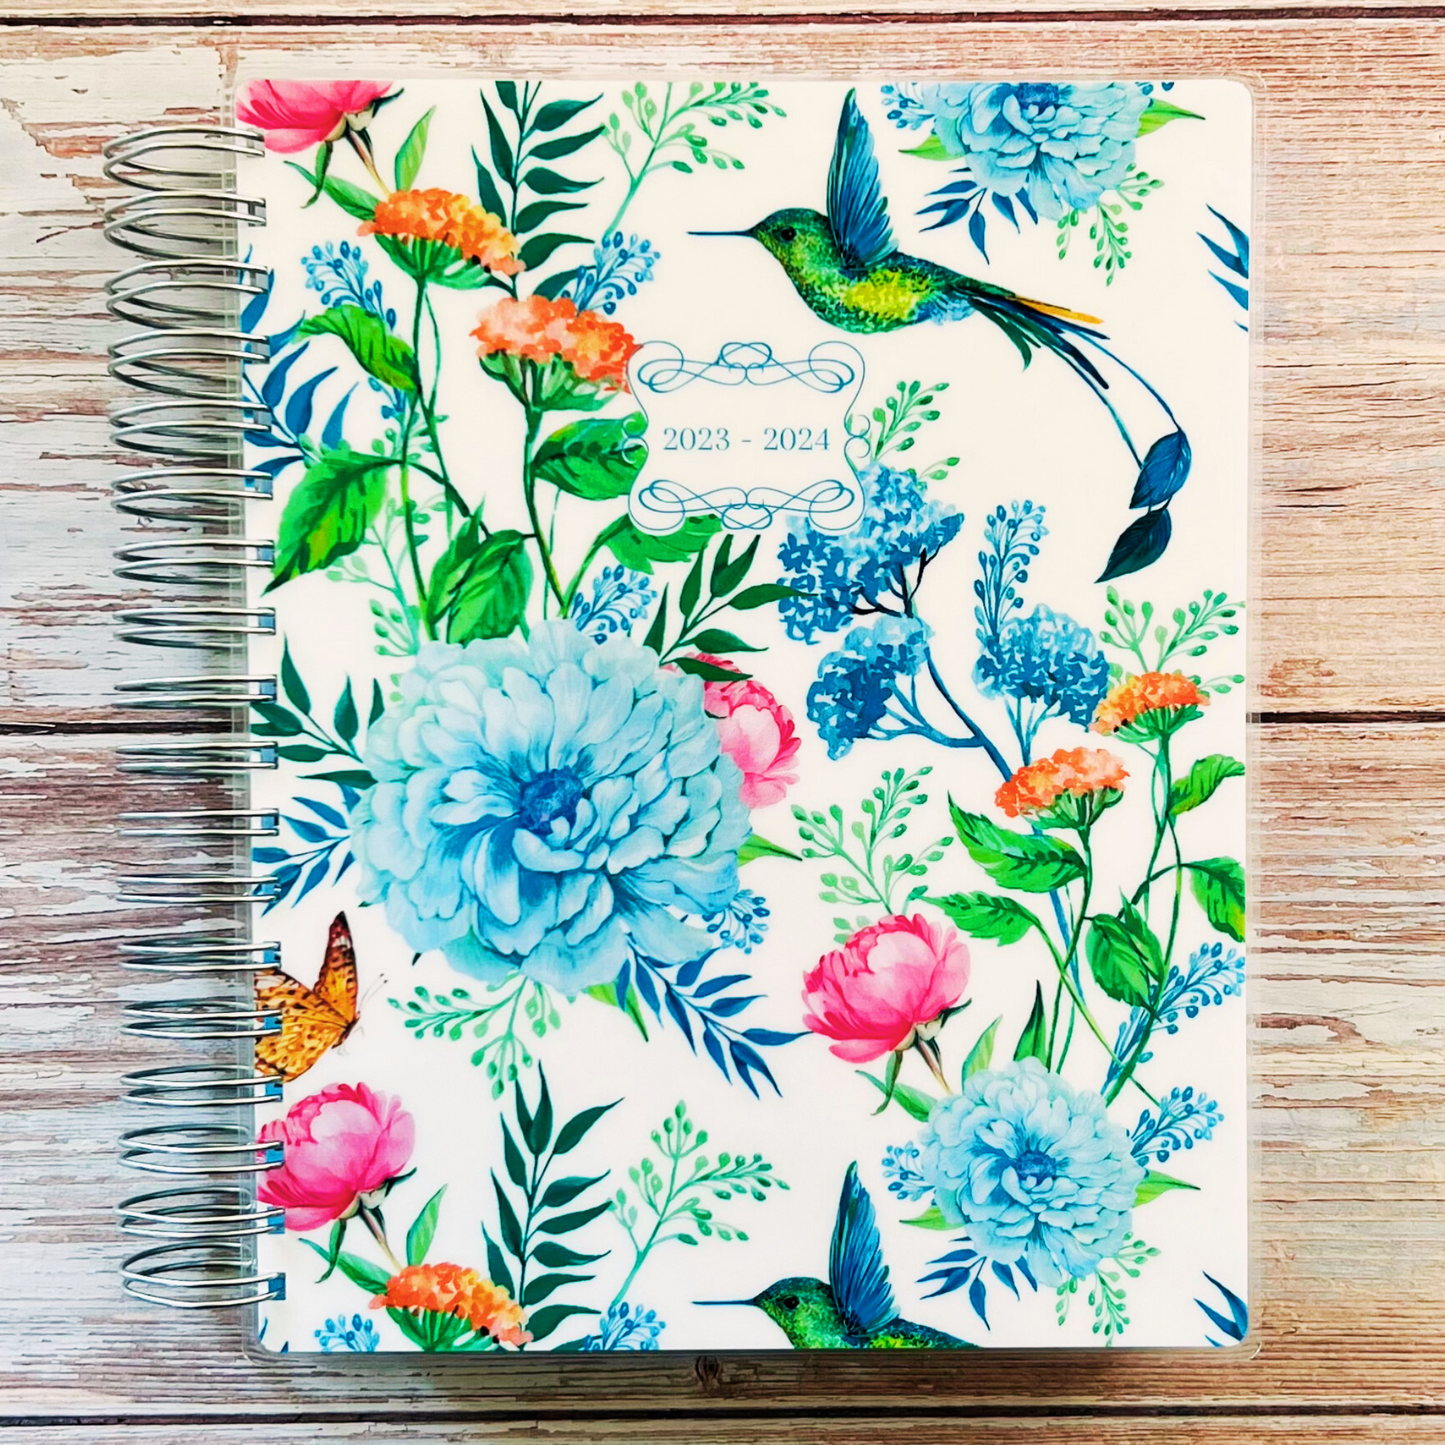 Personalized 6 Month Daily Planner 2023-2024 | Blue Hummingbird Garden Daily Planners Artful Planner Co. June-2023 20 Meal Planners +$3.00 (added to back) 